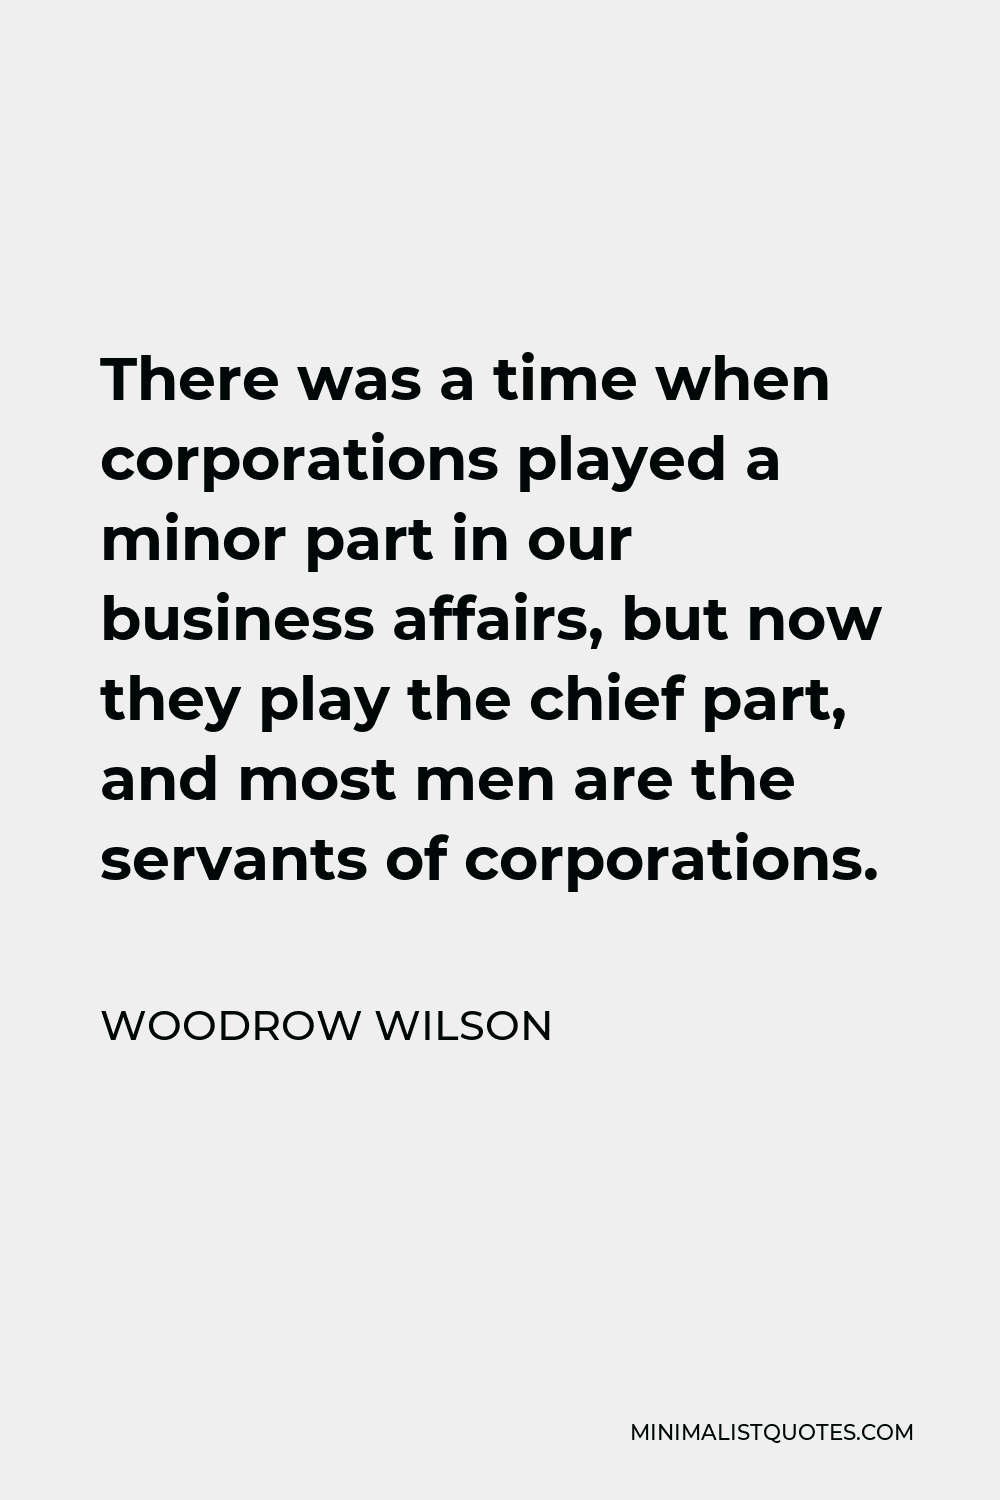 Woodrow Wilson Quote - There was a time when corporations played a minor part in our business affairs, but now they play the chief part, and most men are the servants of corporations.